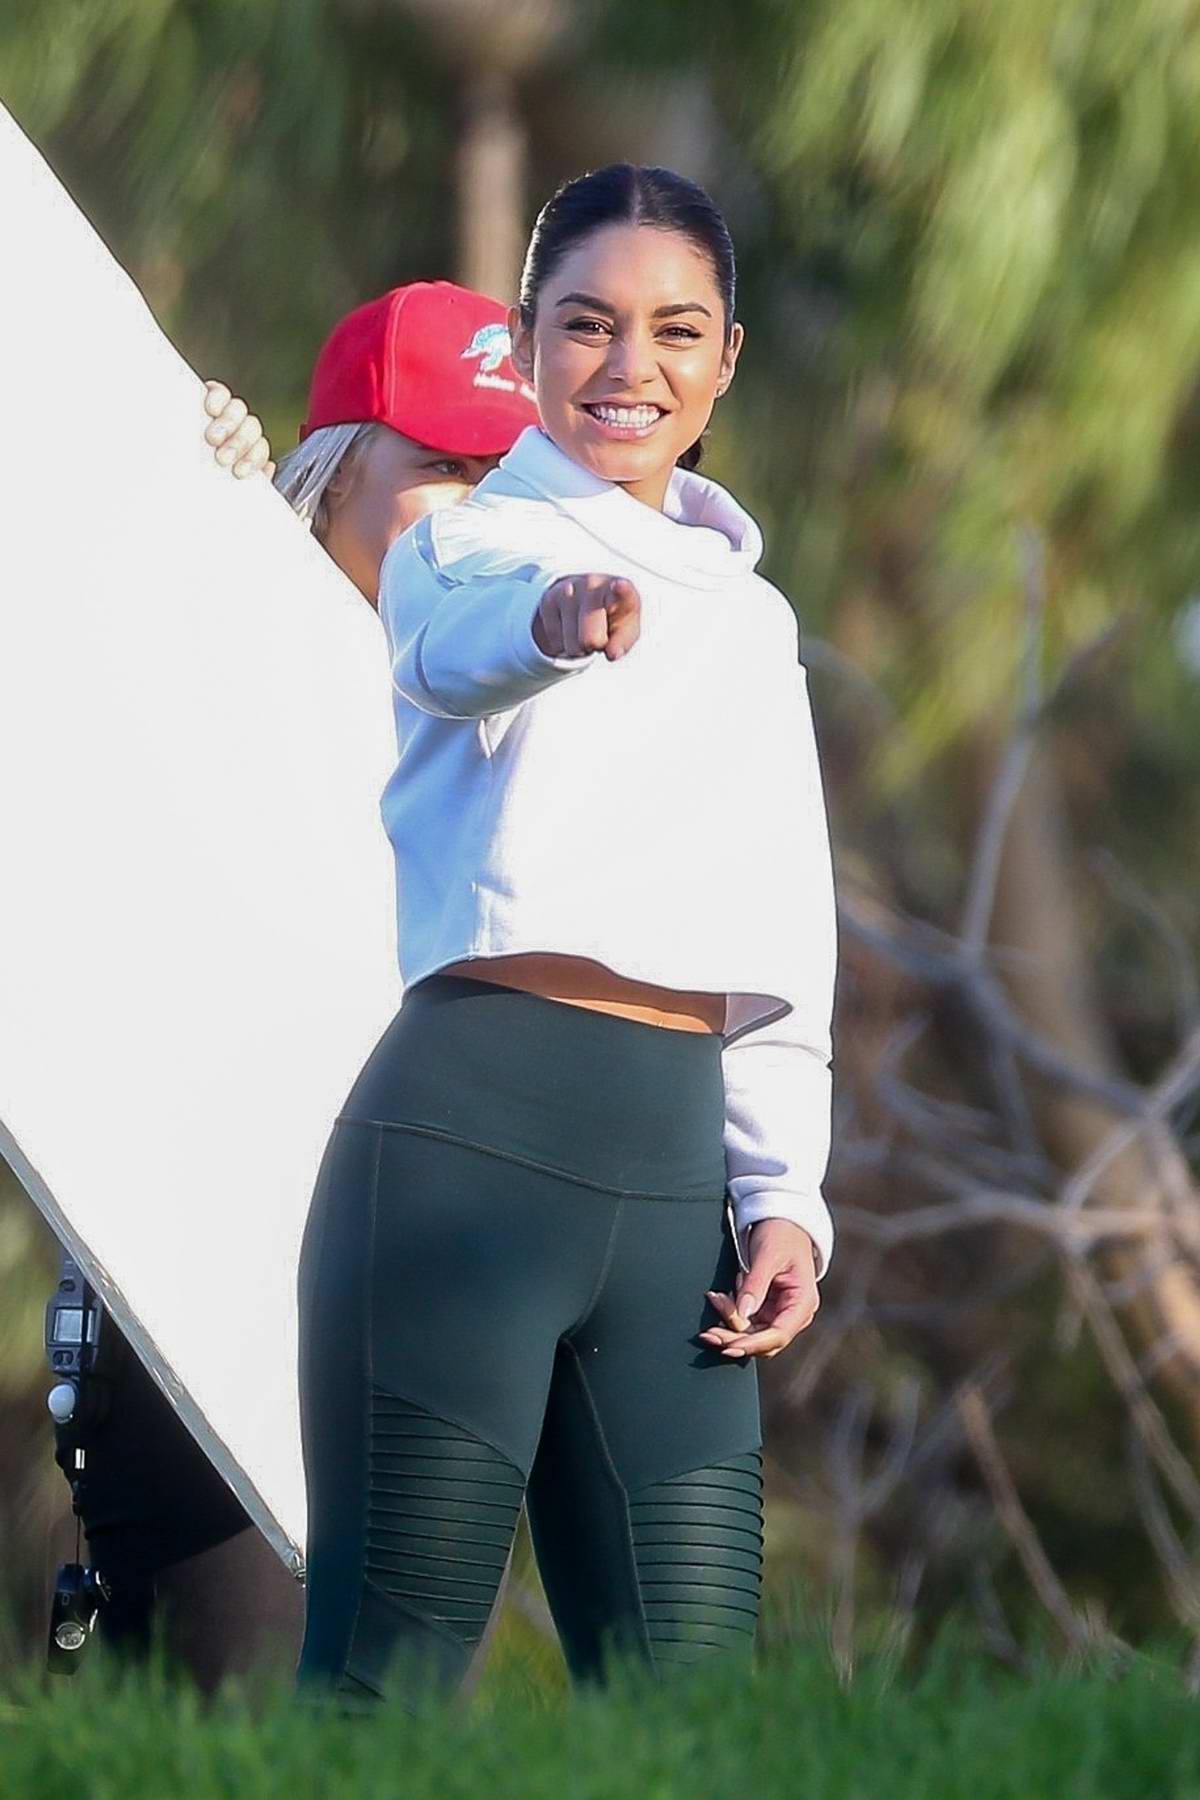 https://www.celebsfirst.com/wp-content/uploads/2020/01/vanessa-hudgens-seen-filming-a-sportswear-ad-for-her-avia-activewear-collection-in-los-angeles-160120_5.jpg